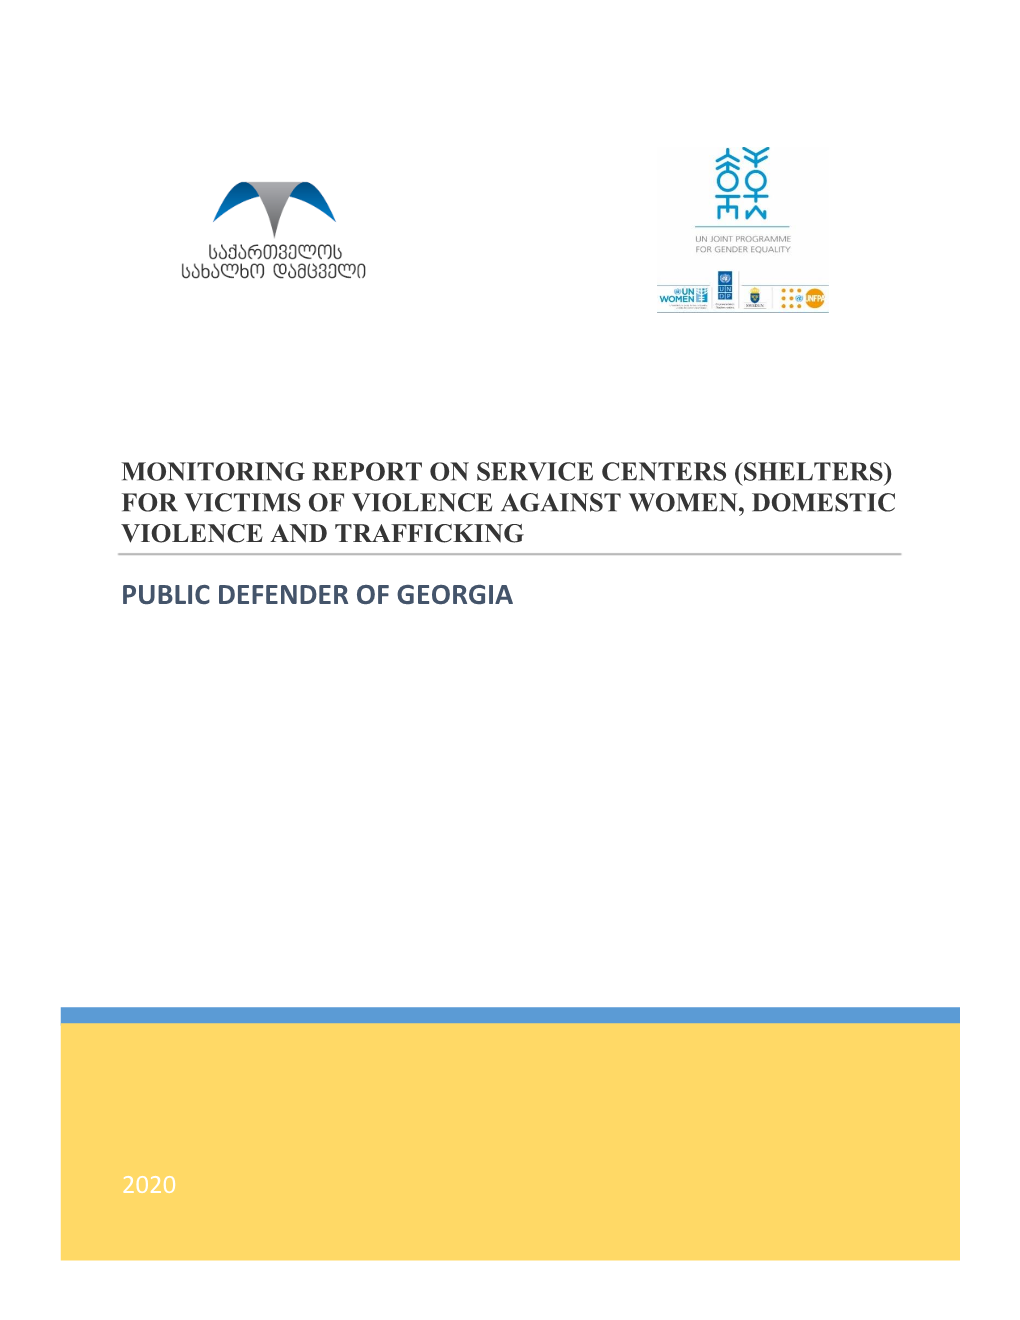 Monitoring Report on Service Centers (Shelters) for Victims of Violence Against Women, Domestic Violence and Trafficking